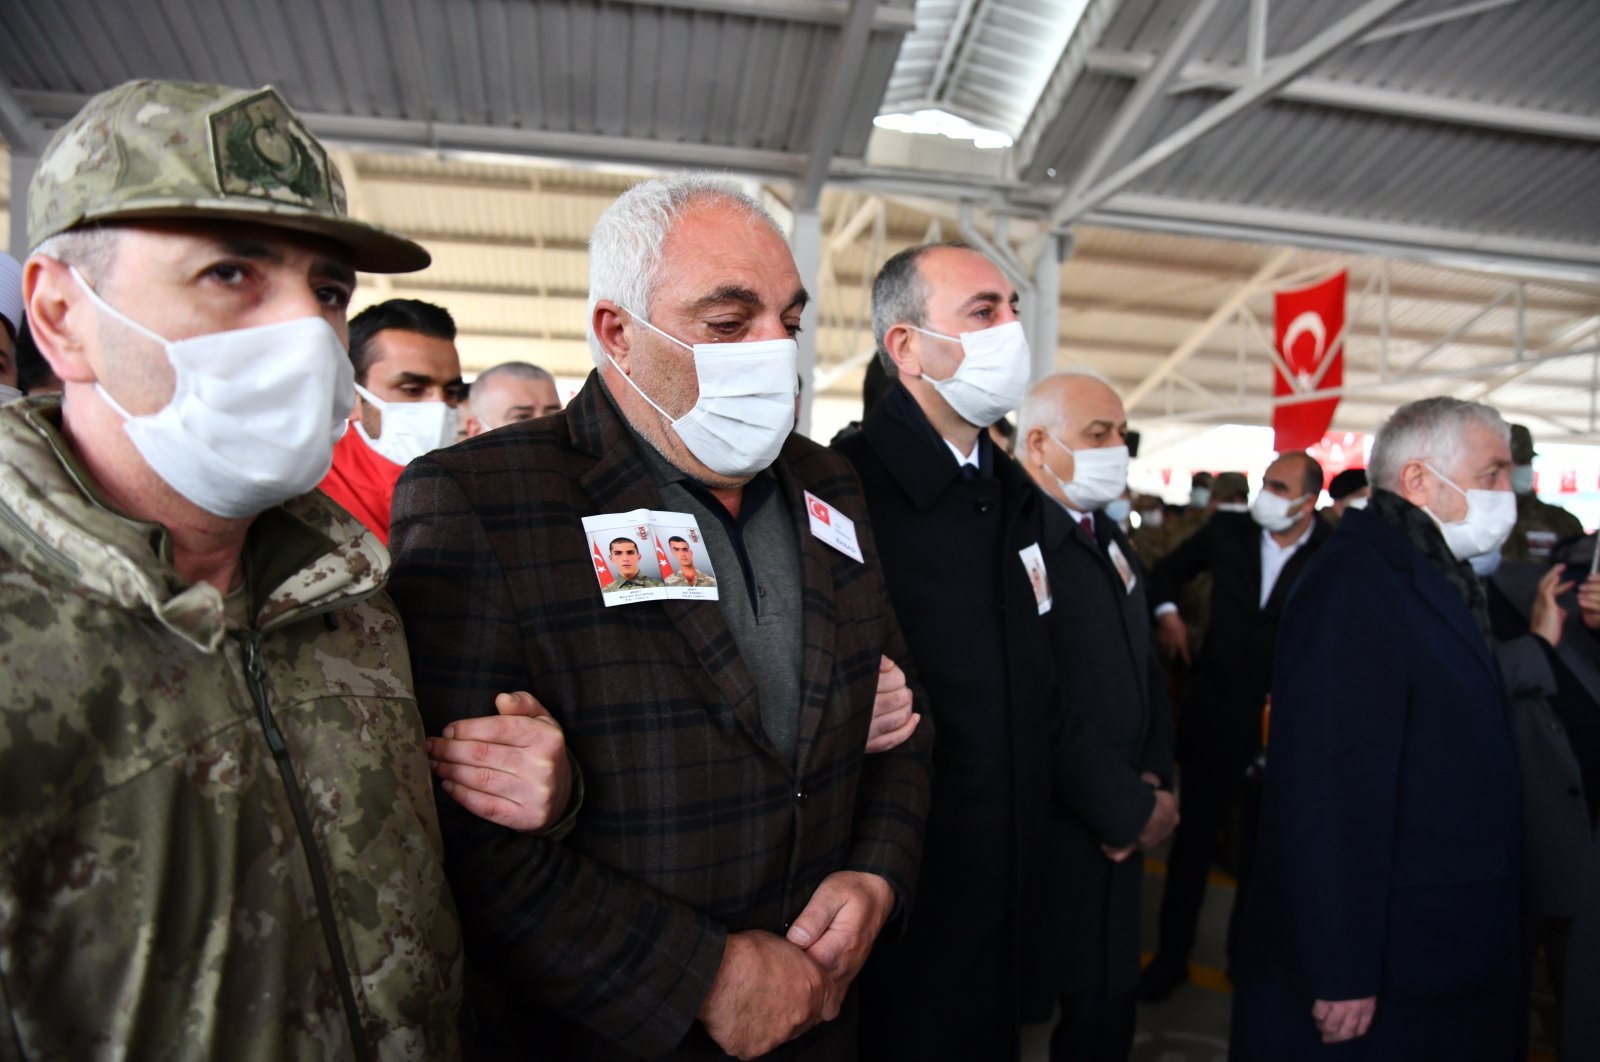 Şevket Altıntaş (C), the father of Müslüm Altıntaş who was executed by PKK terrorists in northern Iraq, attends the funeral ceremony of his son with Justice Minister Abdulhamit Gül (R) in Gaziantep province, southeastern Turkey, Feb. 16, 2021. (AA Photo)